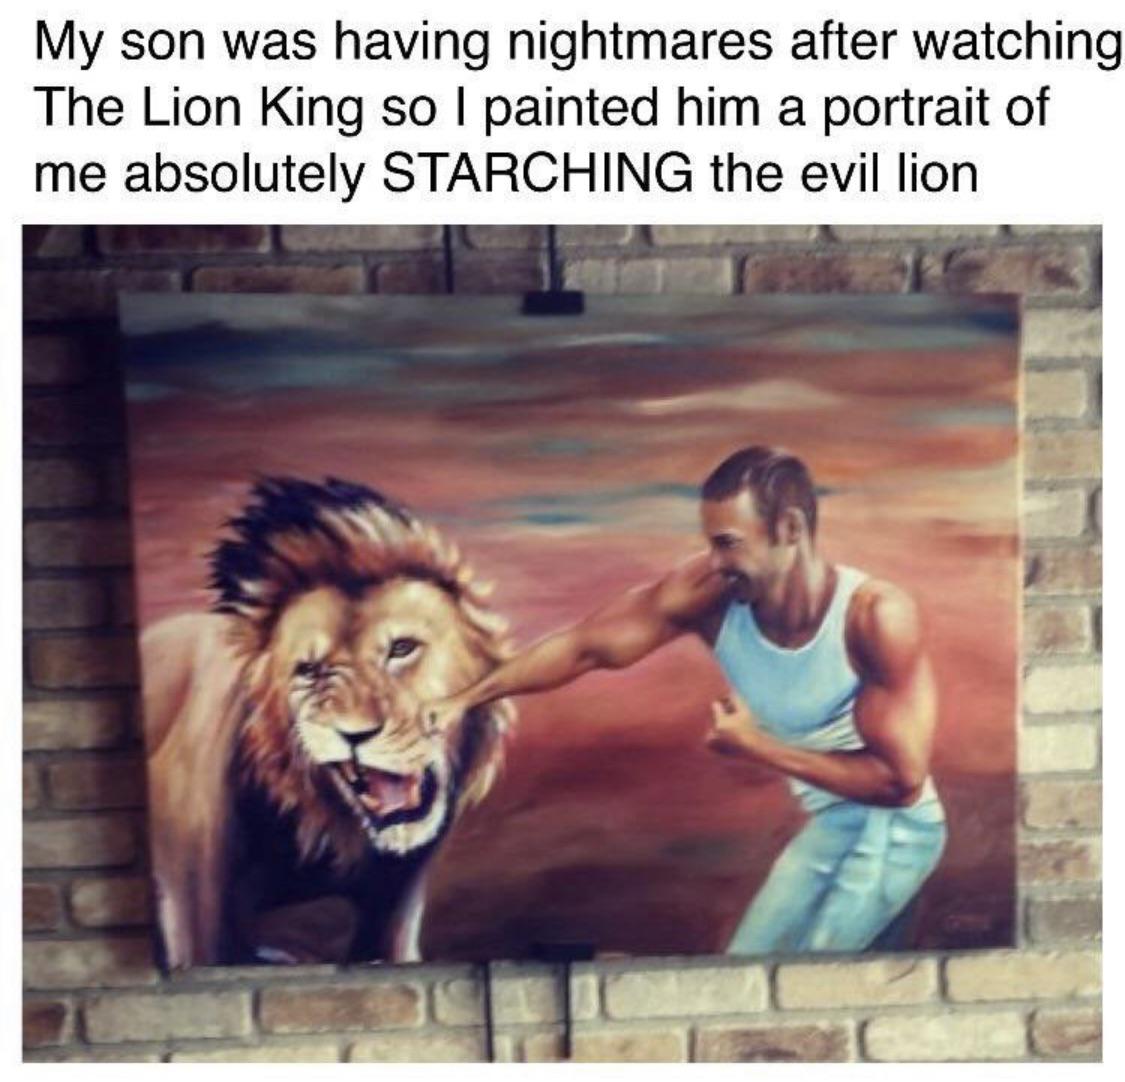 absolutely starching the evil lion - My son was having nightmares after watching The Lion King so I painted him a portrait of me absolutely Starching the evil lion